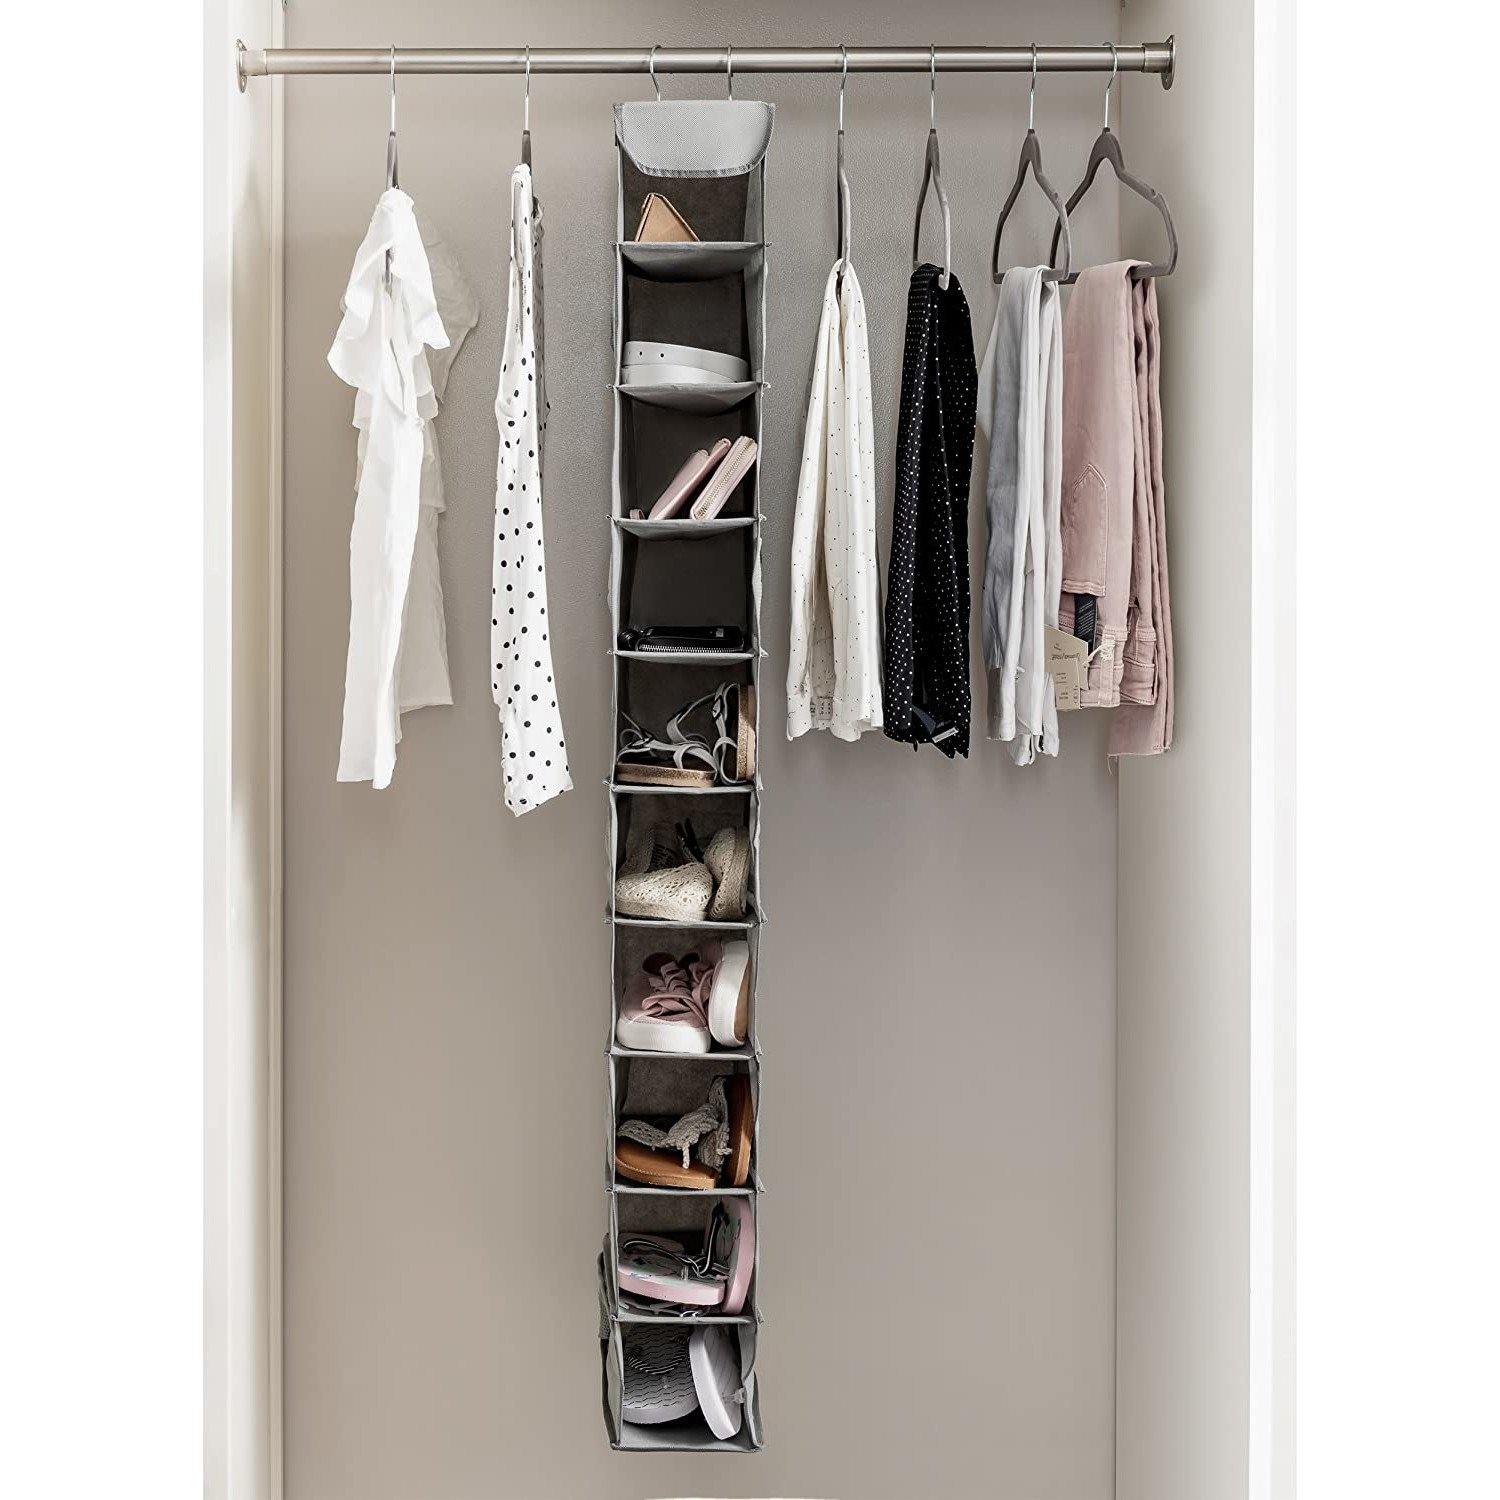 Double R Bags Hanging Shoe Organizer for Closet with Side Mesh Pockets 10 Shelf Pack Of 1 Grey - Double R Bags